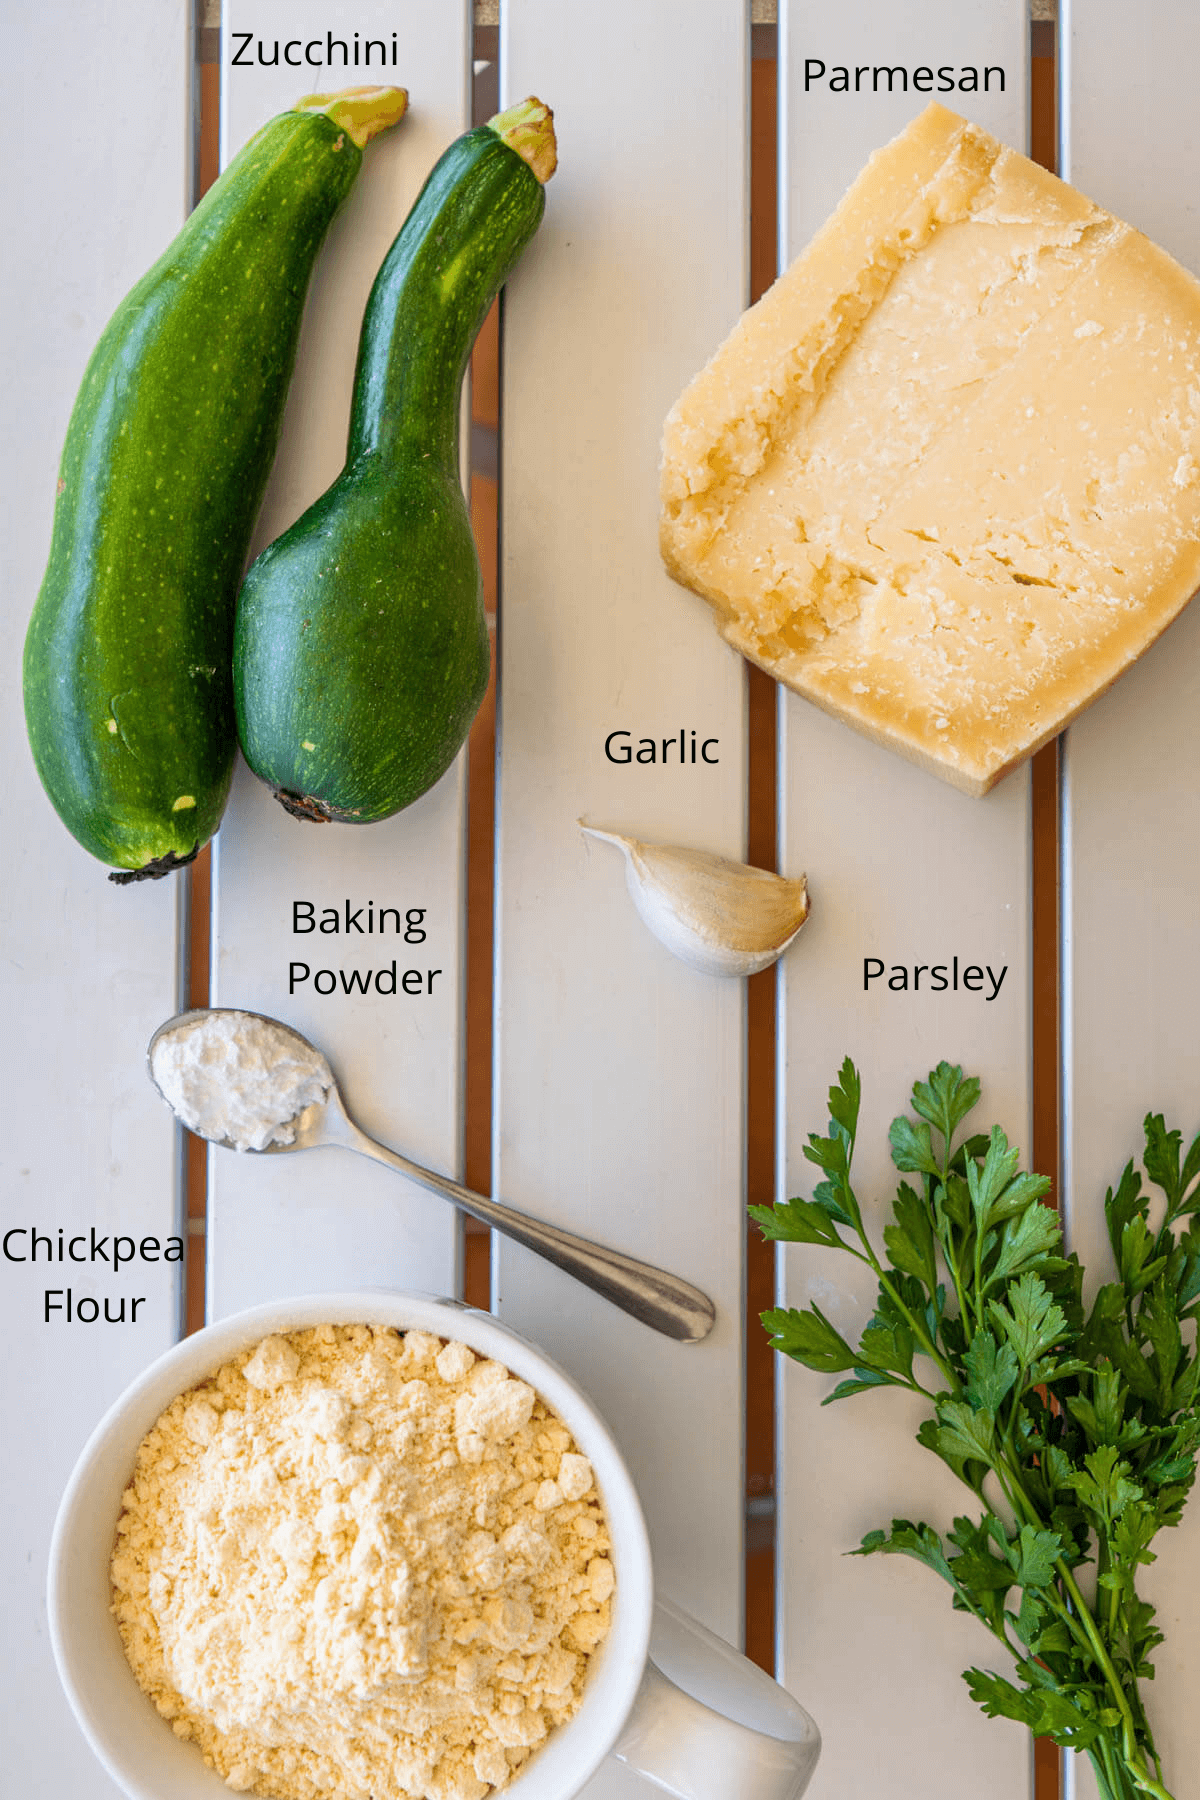 Ingredients list to make Frittelle Di Zucchine (Italian Fritters)